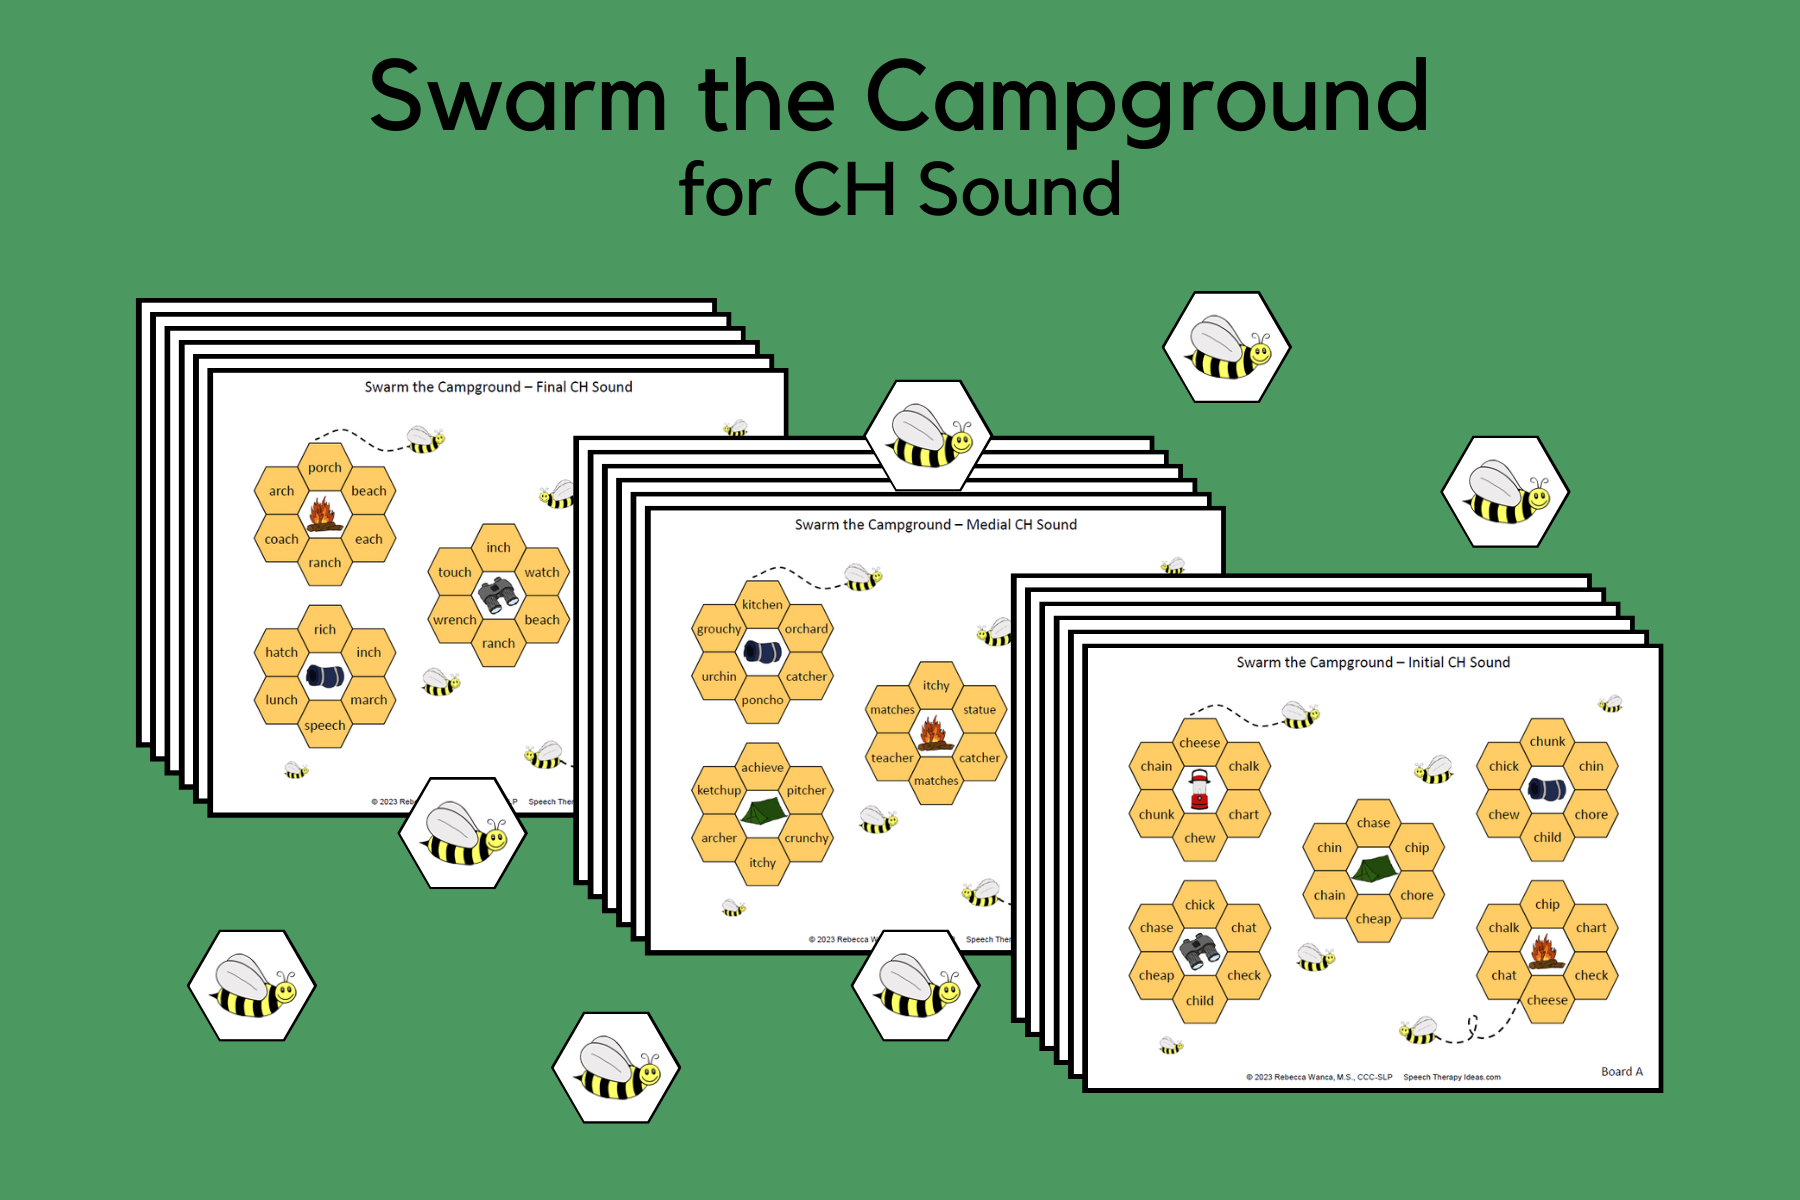 Swarm the Campground for CH Sound